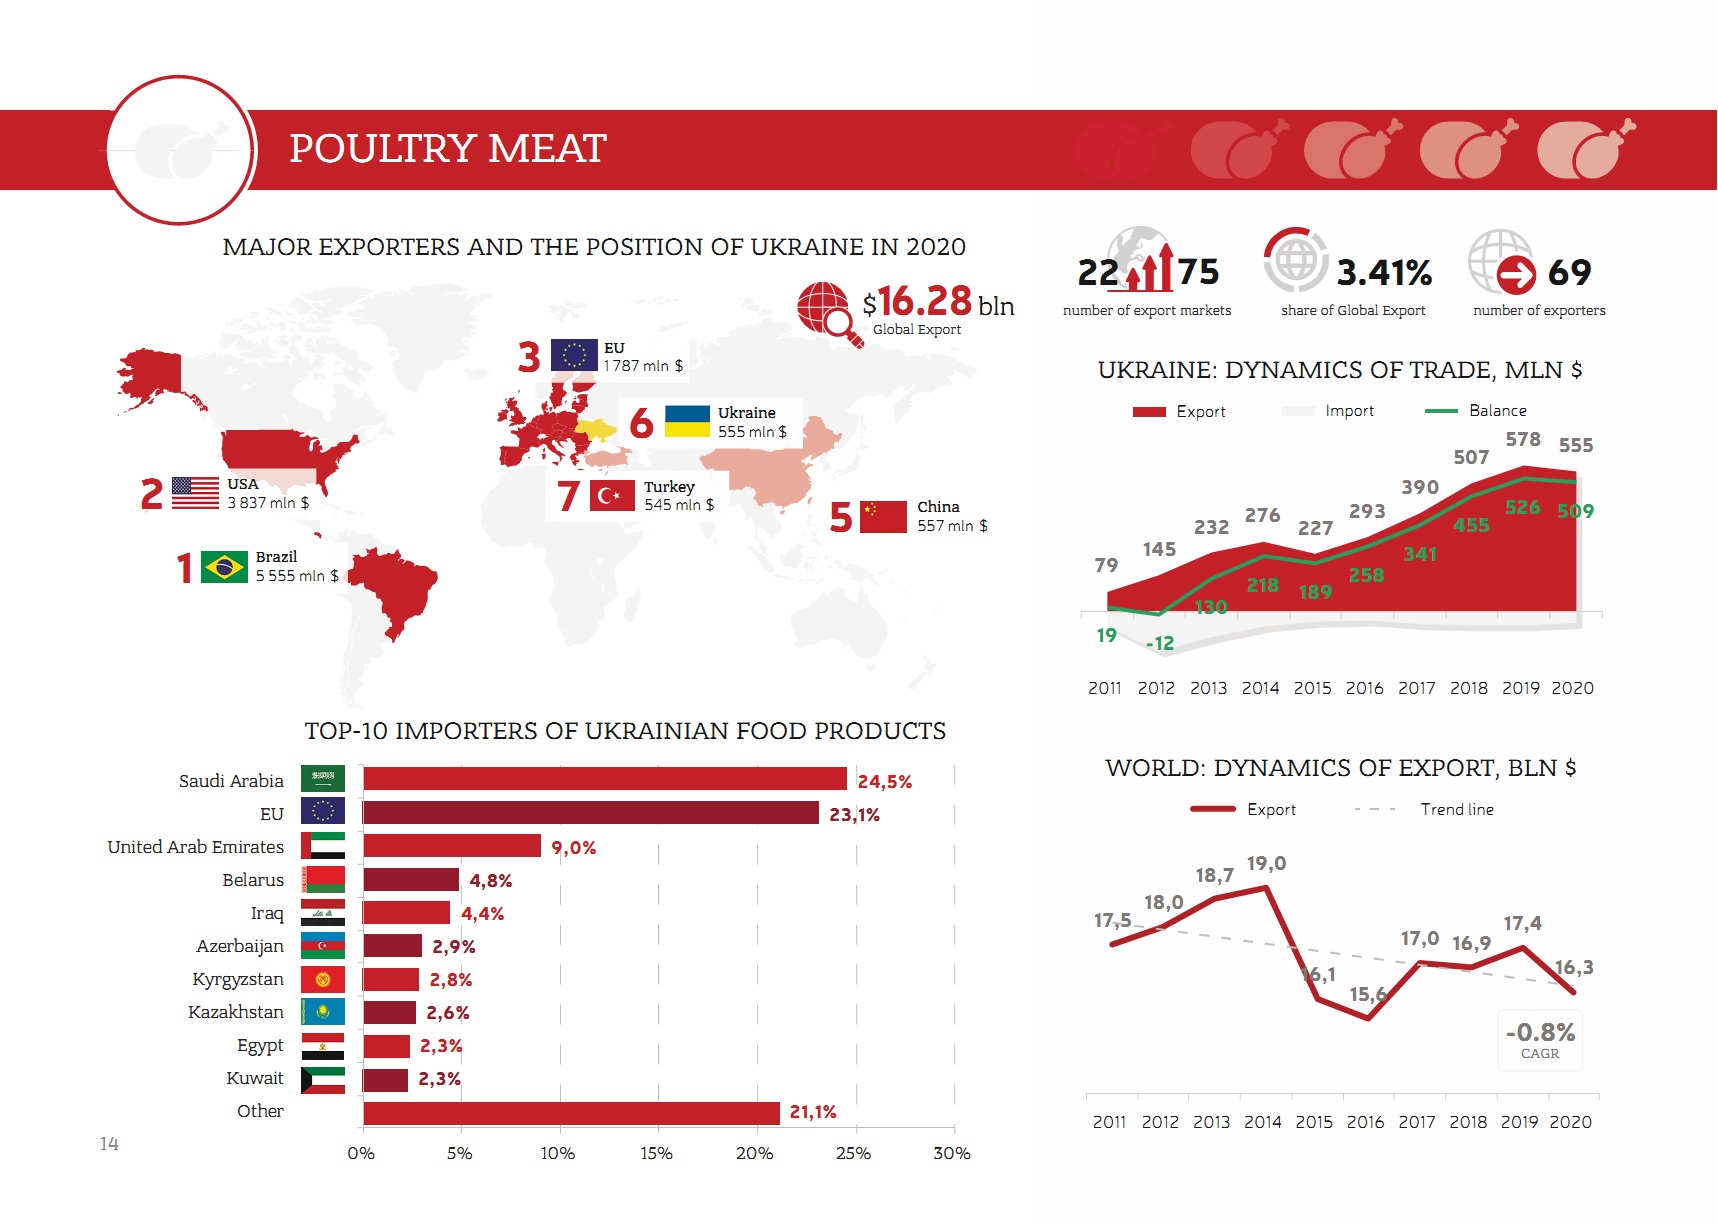 Ukraine's position in the global poultry meat market (click for higher resolution). Source: UBTA